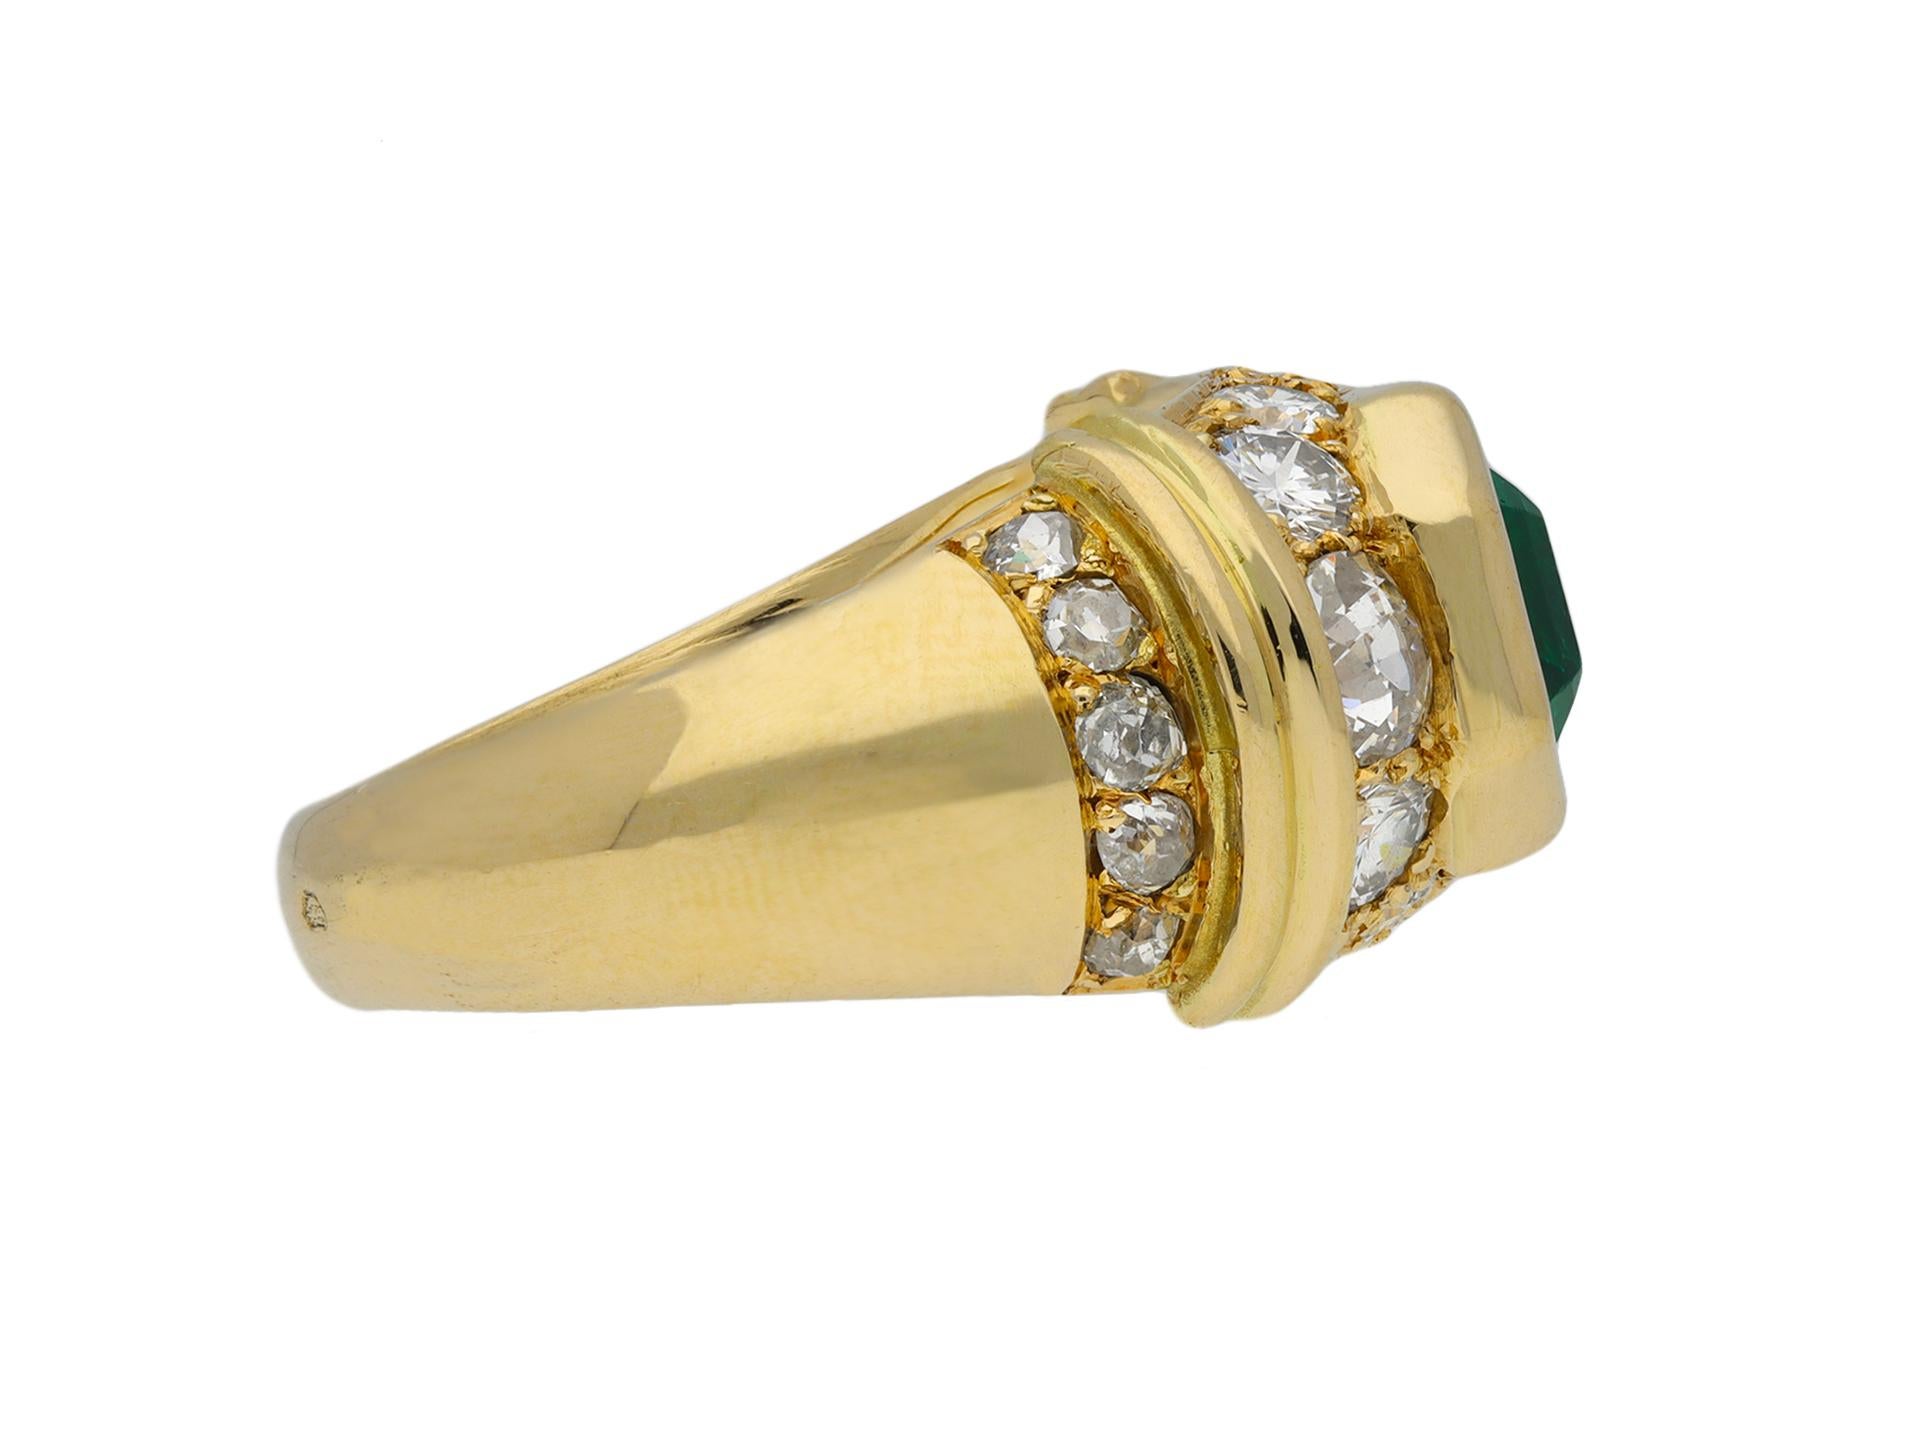 Colombian emerald and diamond ring. Set horizontally to center with an octagonal emerald-cut natural Colombian emerald with no colour enhancement in an open back rubover setting with an approximate weight of 1.60 carats, encircled by a single row of